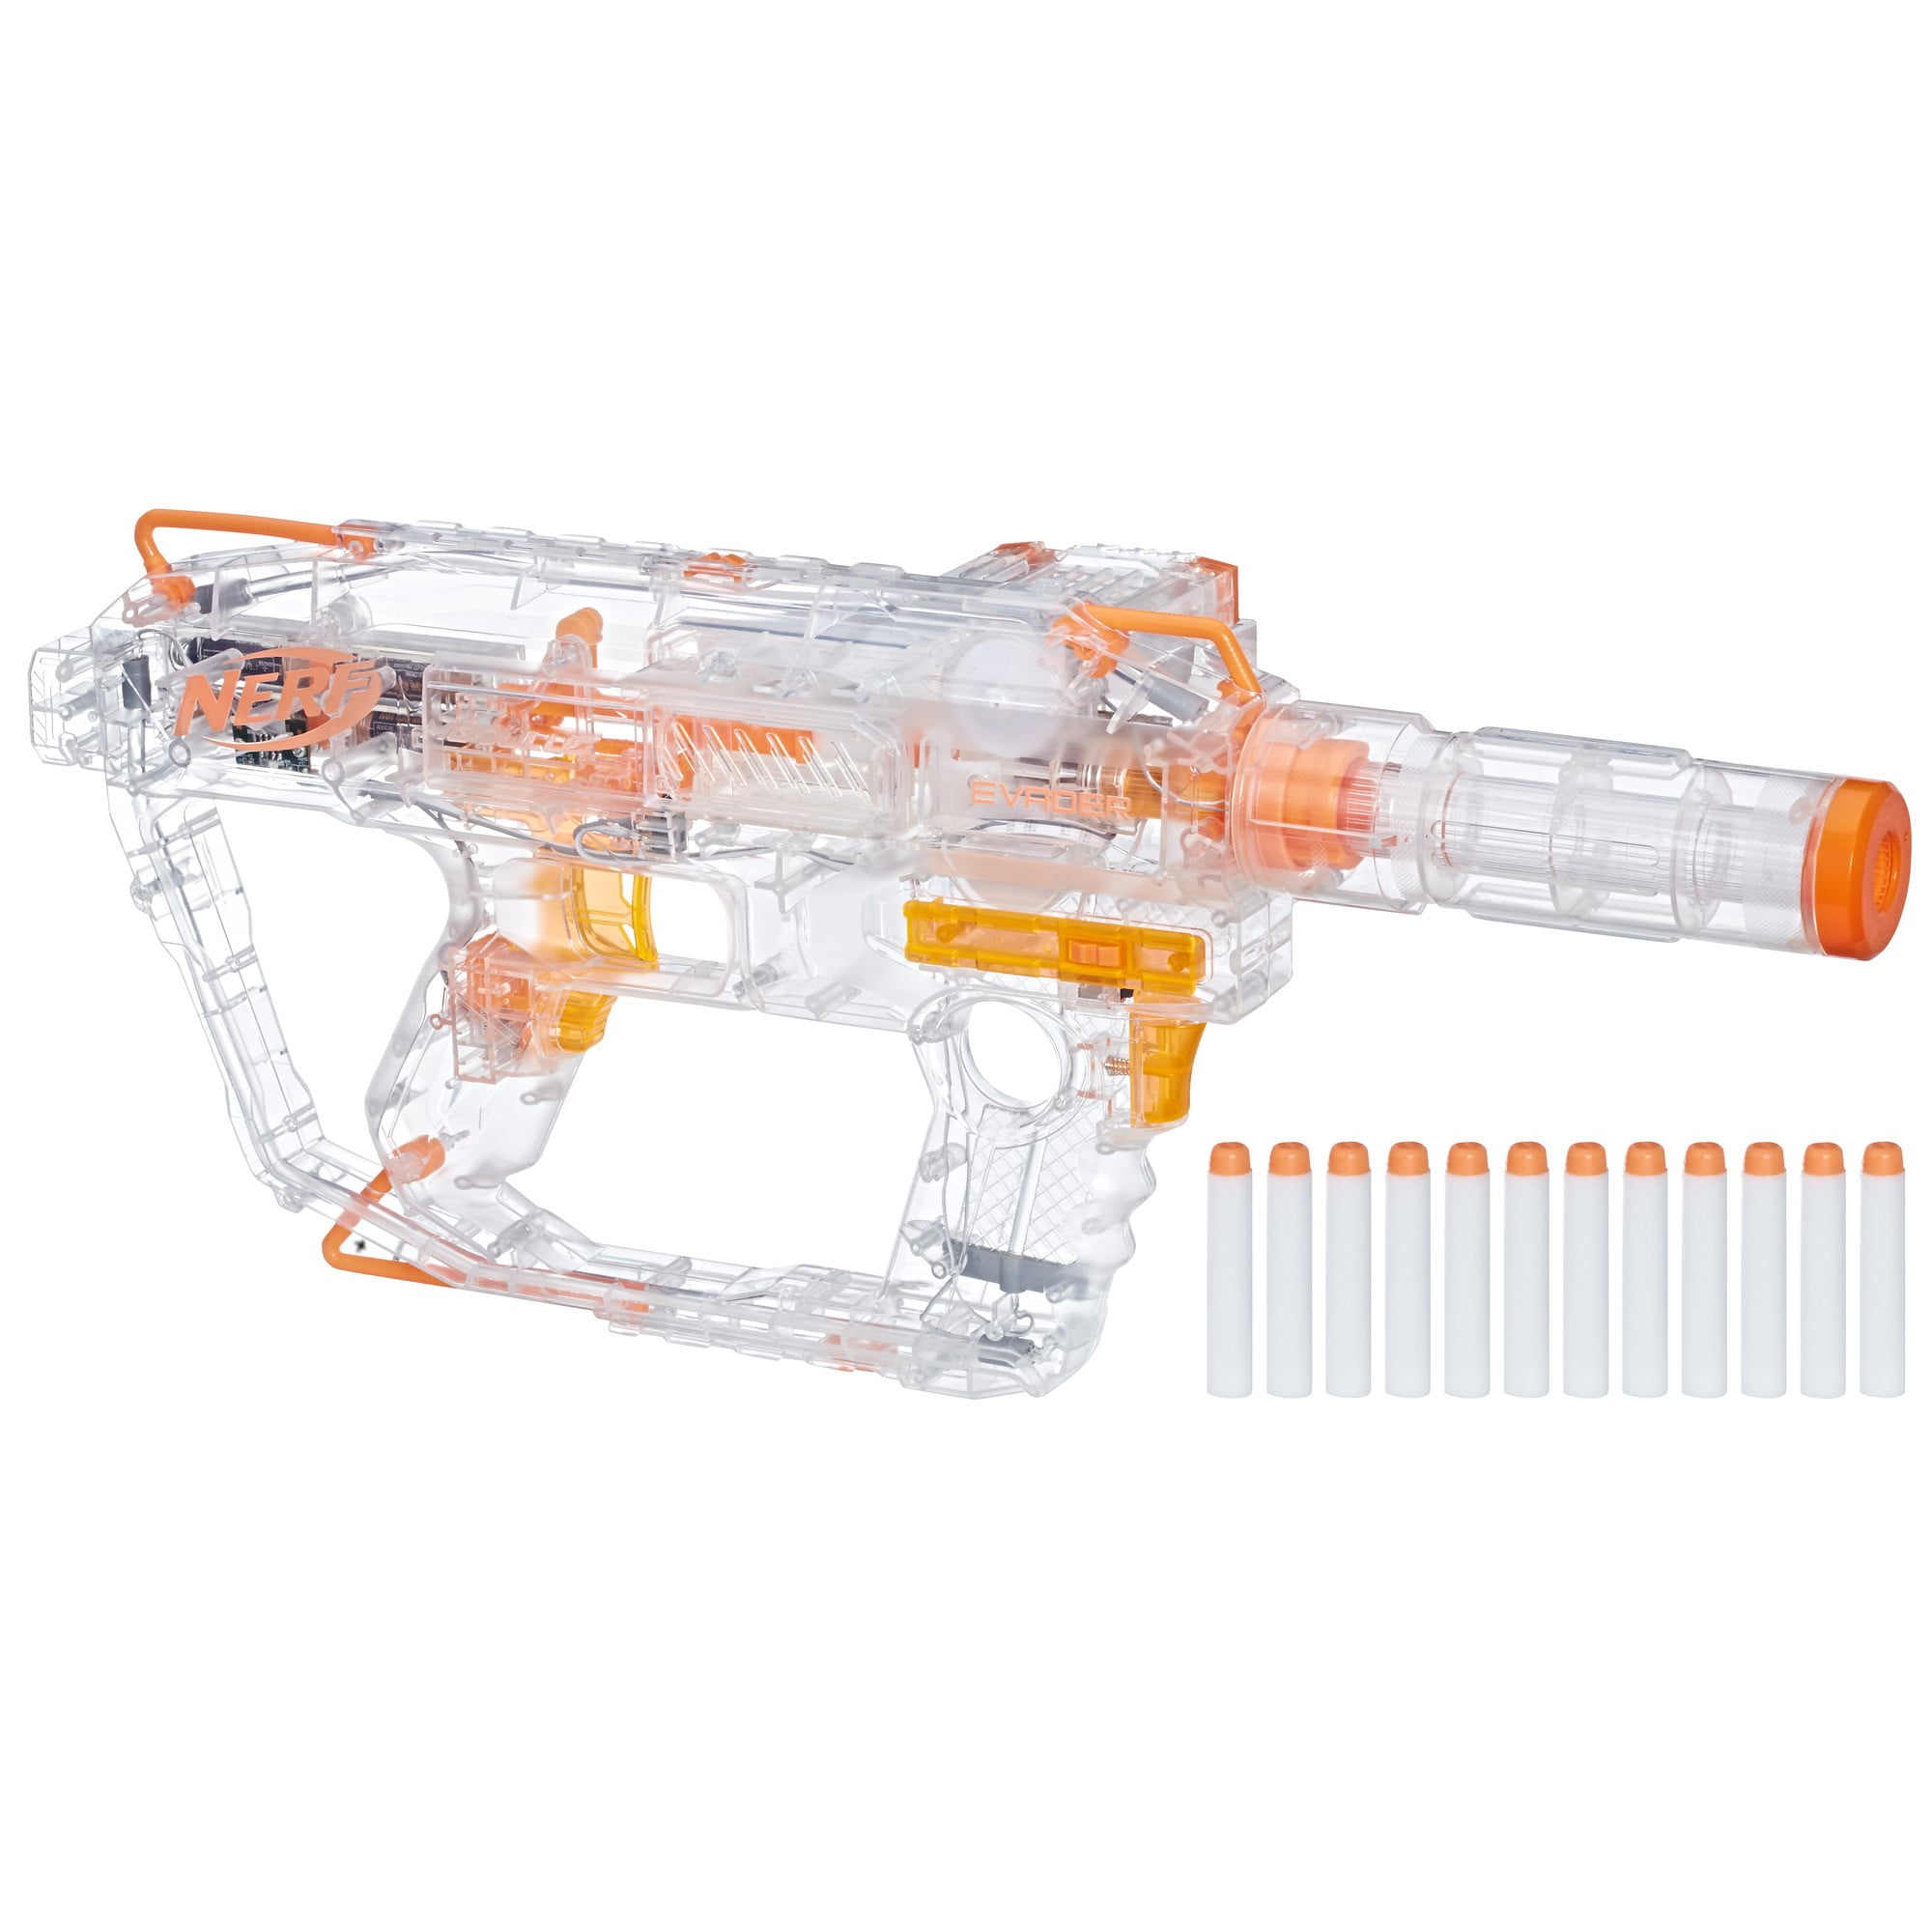 Photo 1 of NERF Modulus Ghost Ops Evader Motorized Blaster -- Light-Up See-Through Blaster and Barrel Extension, Includes 12 Official Elite Darts (Amazon Exclusive)